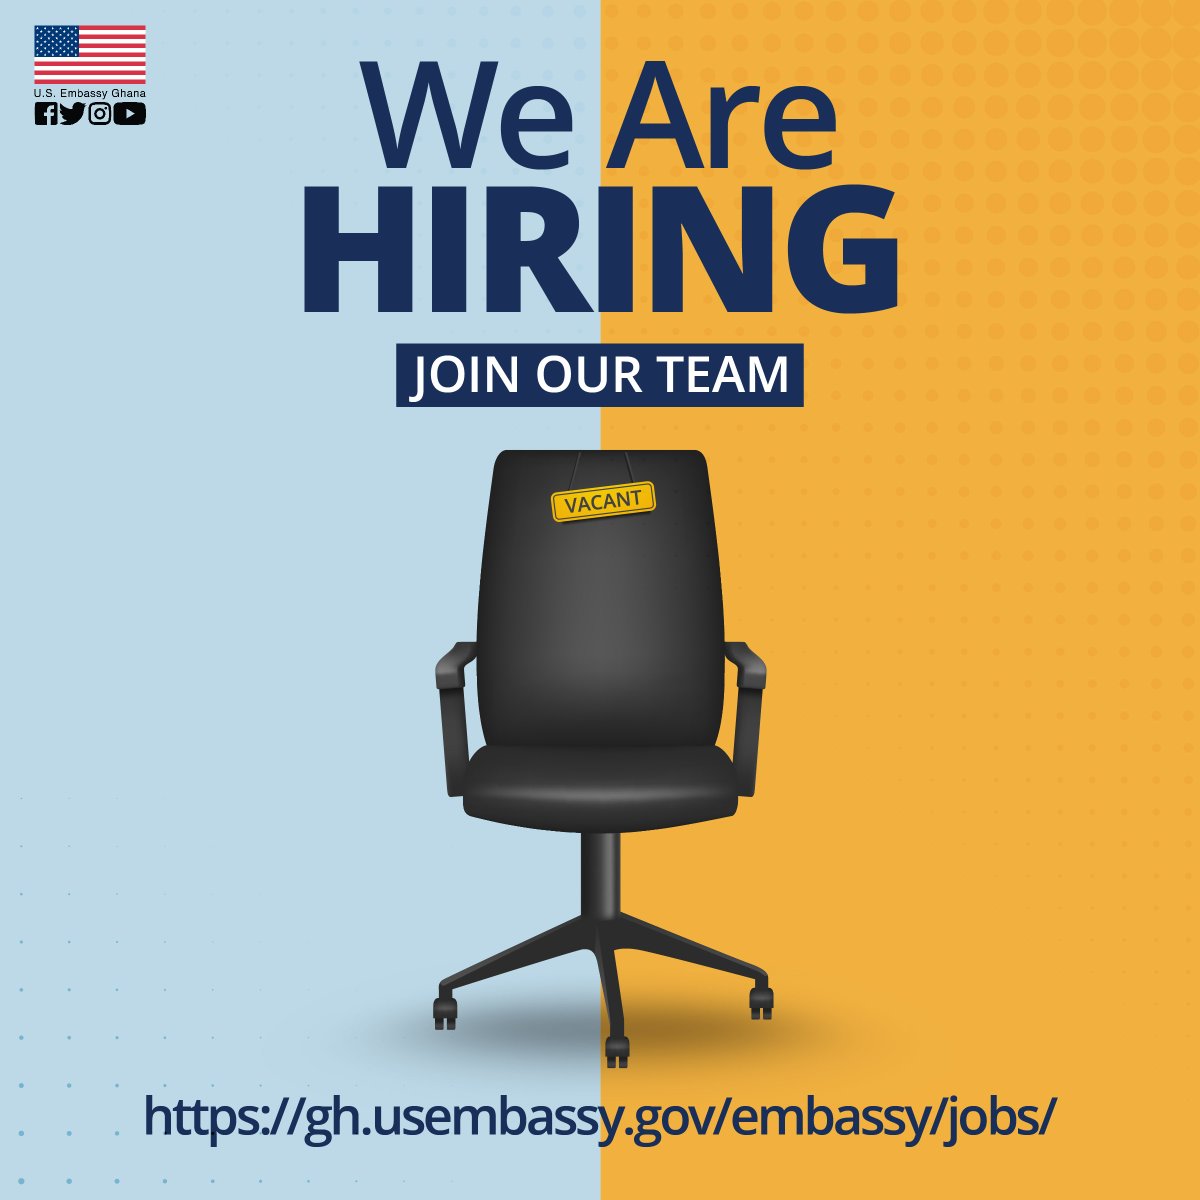 The U.S. Mission in Ghana is seeking eligible and qualified applicants for the following positions: - Audio Visual Technician - Warehouse Worker (Truck Driver) CLICK on the link for more information and application: bit.ly/EmbassyJobs